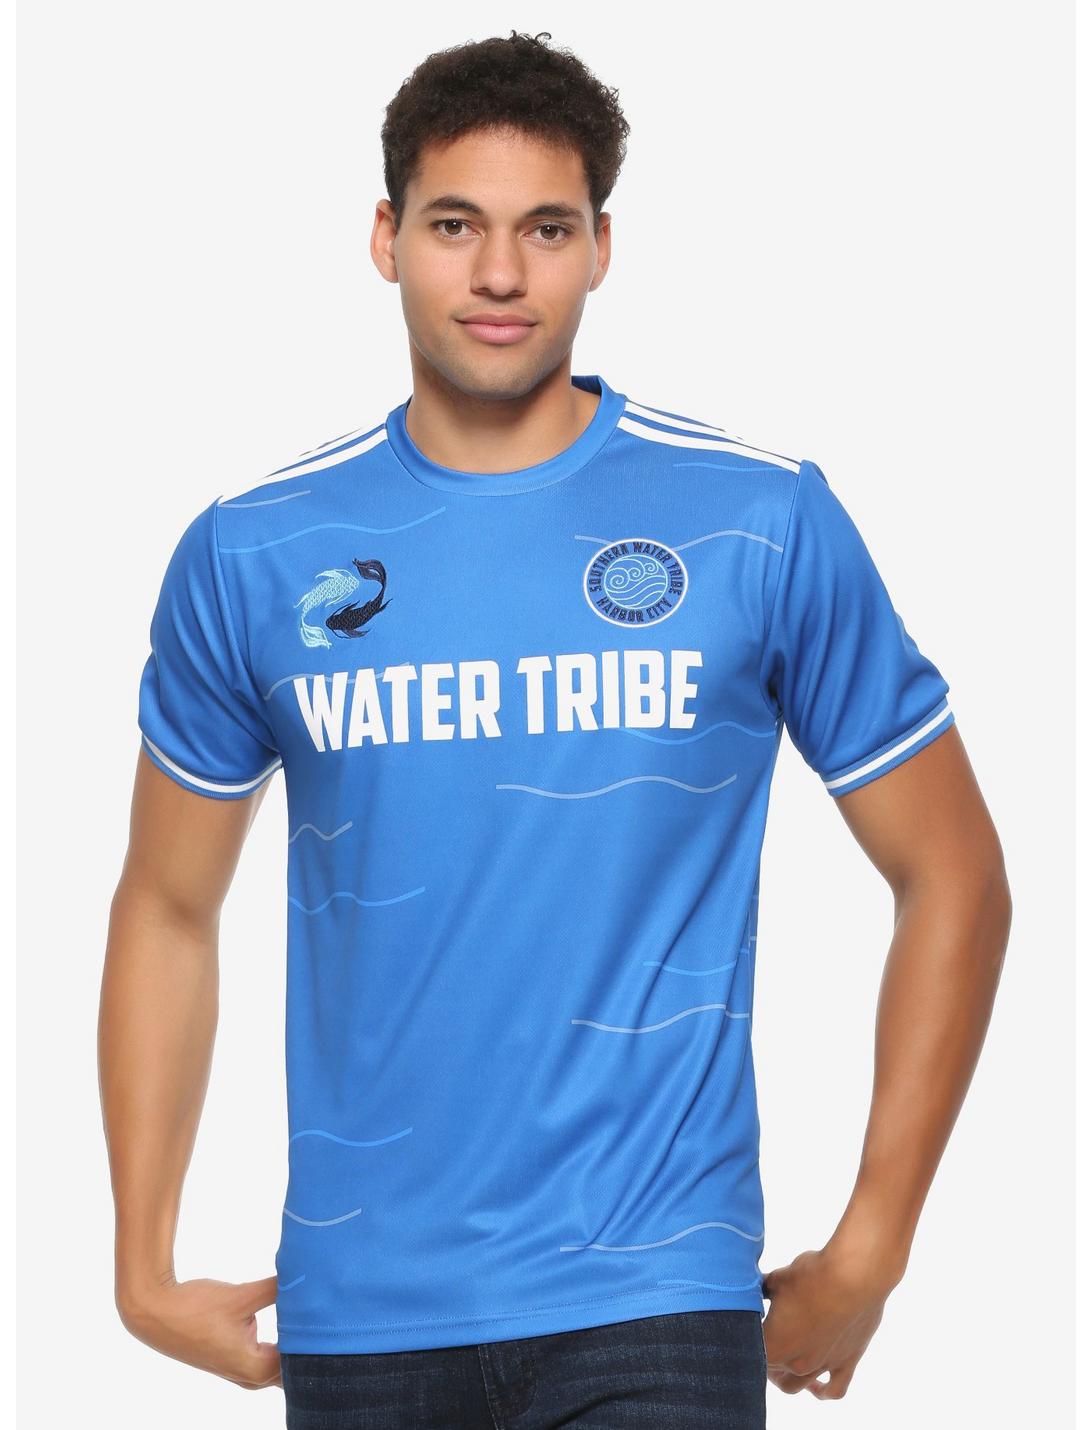 Avatar: The Last Airbender Water Tribe Jersey - BoxLunch Exclusive, BLUE, hi-res